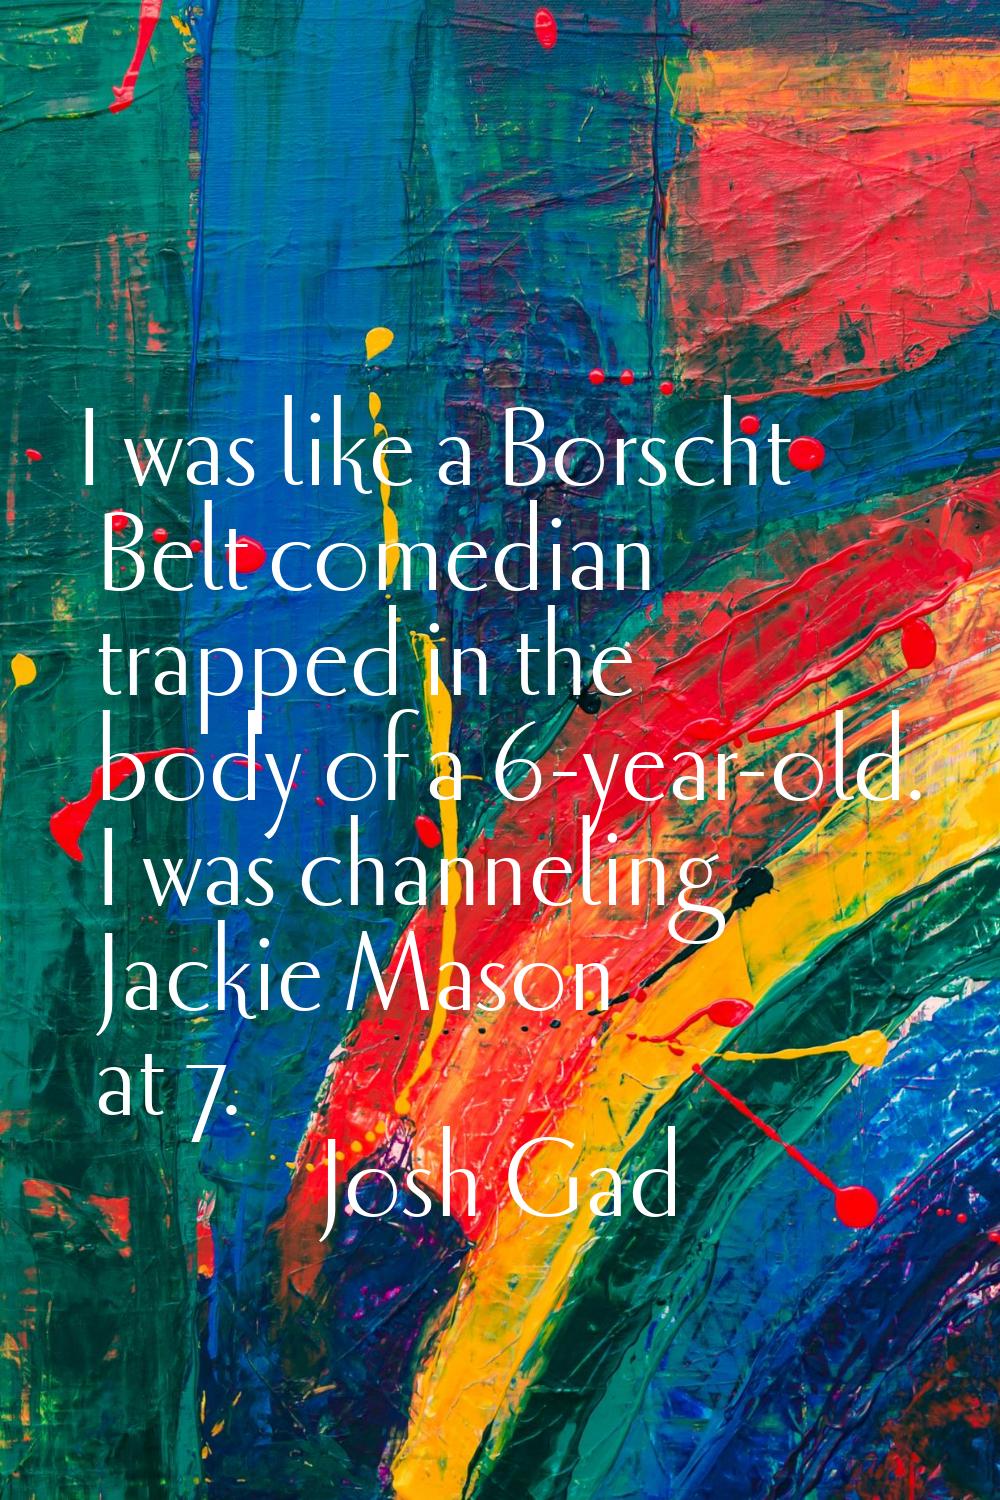 I was like a Borscht Belt comedian trapped in the body of a 6-year-old. I was channeling Jackie Mas